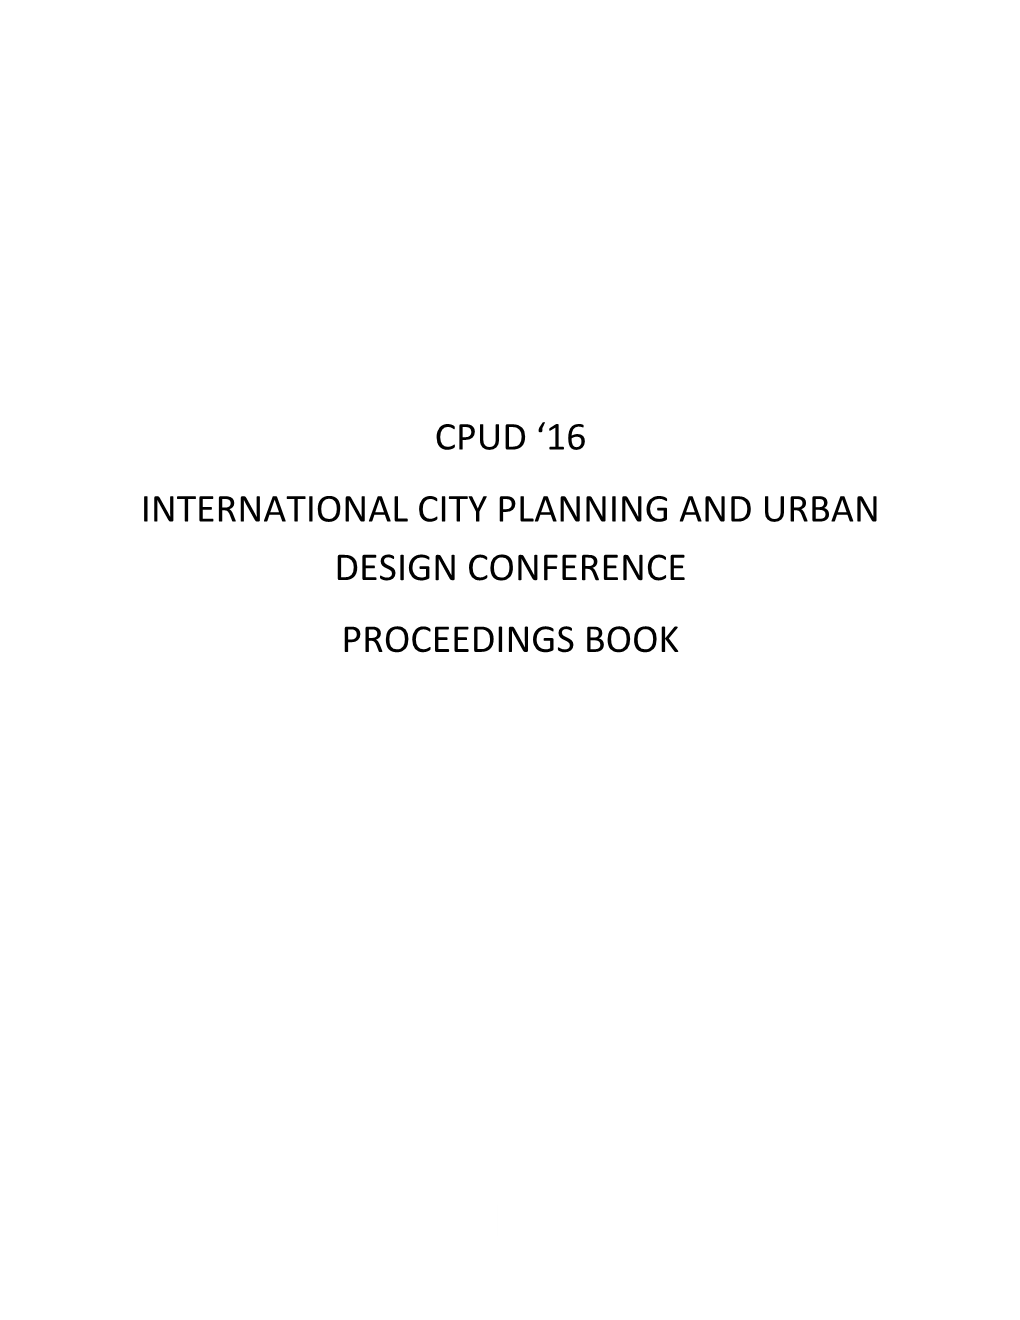 Cpud '16 International City Planning and Urban Design Conference Proceedings Book